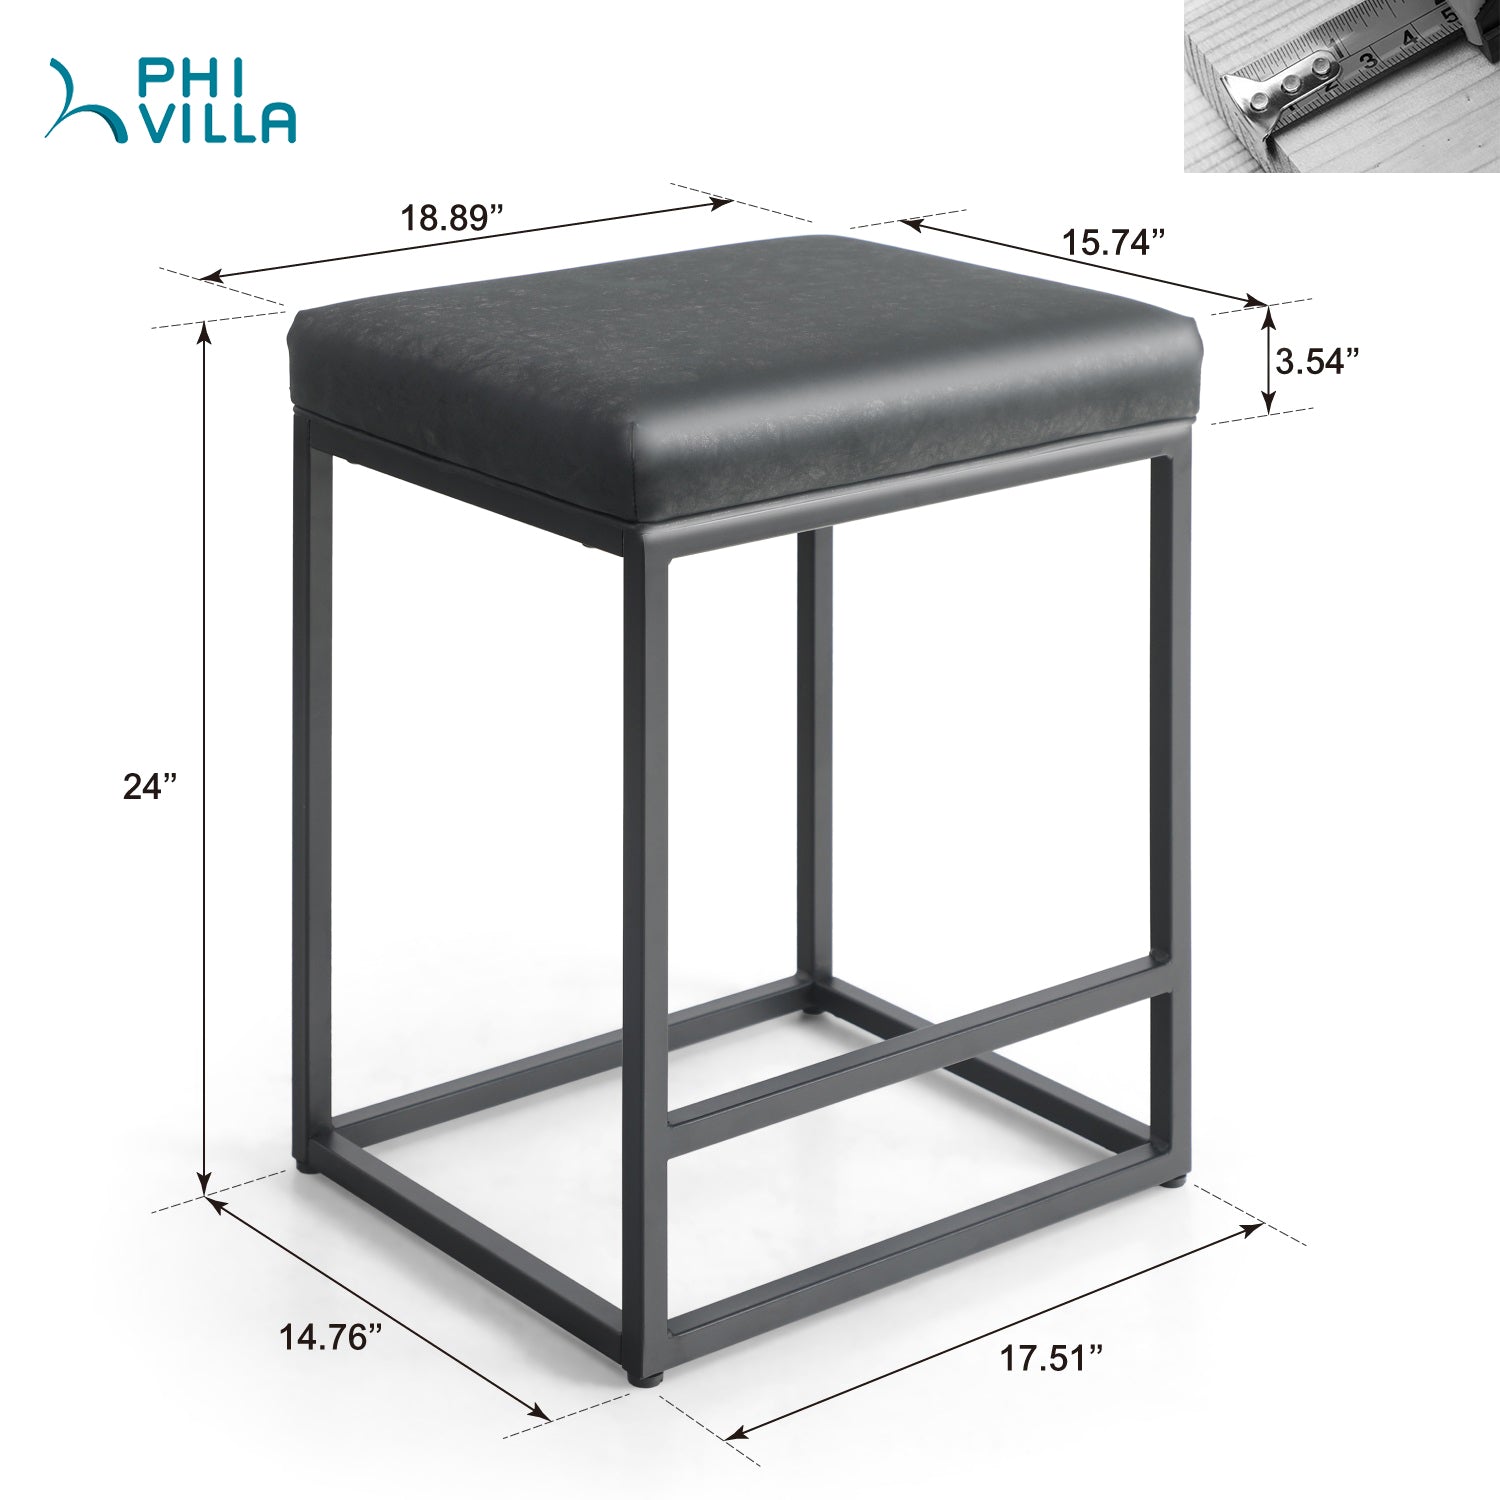 PHI VILLA Square PU Leather Bar Stool with Sturdy Metal Frame, Set of 2